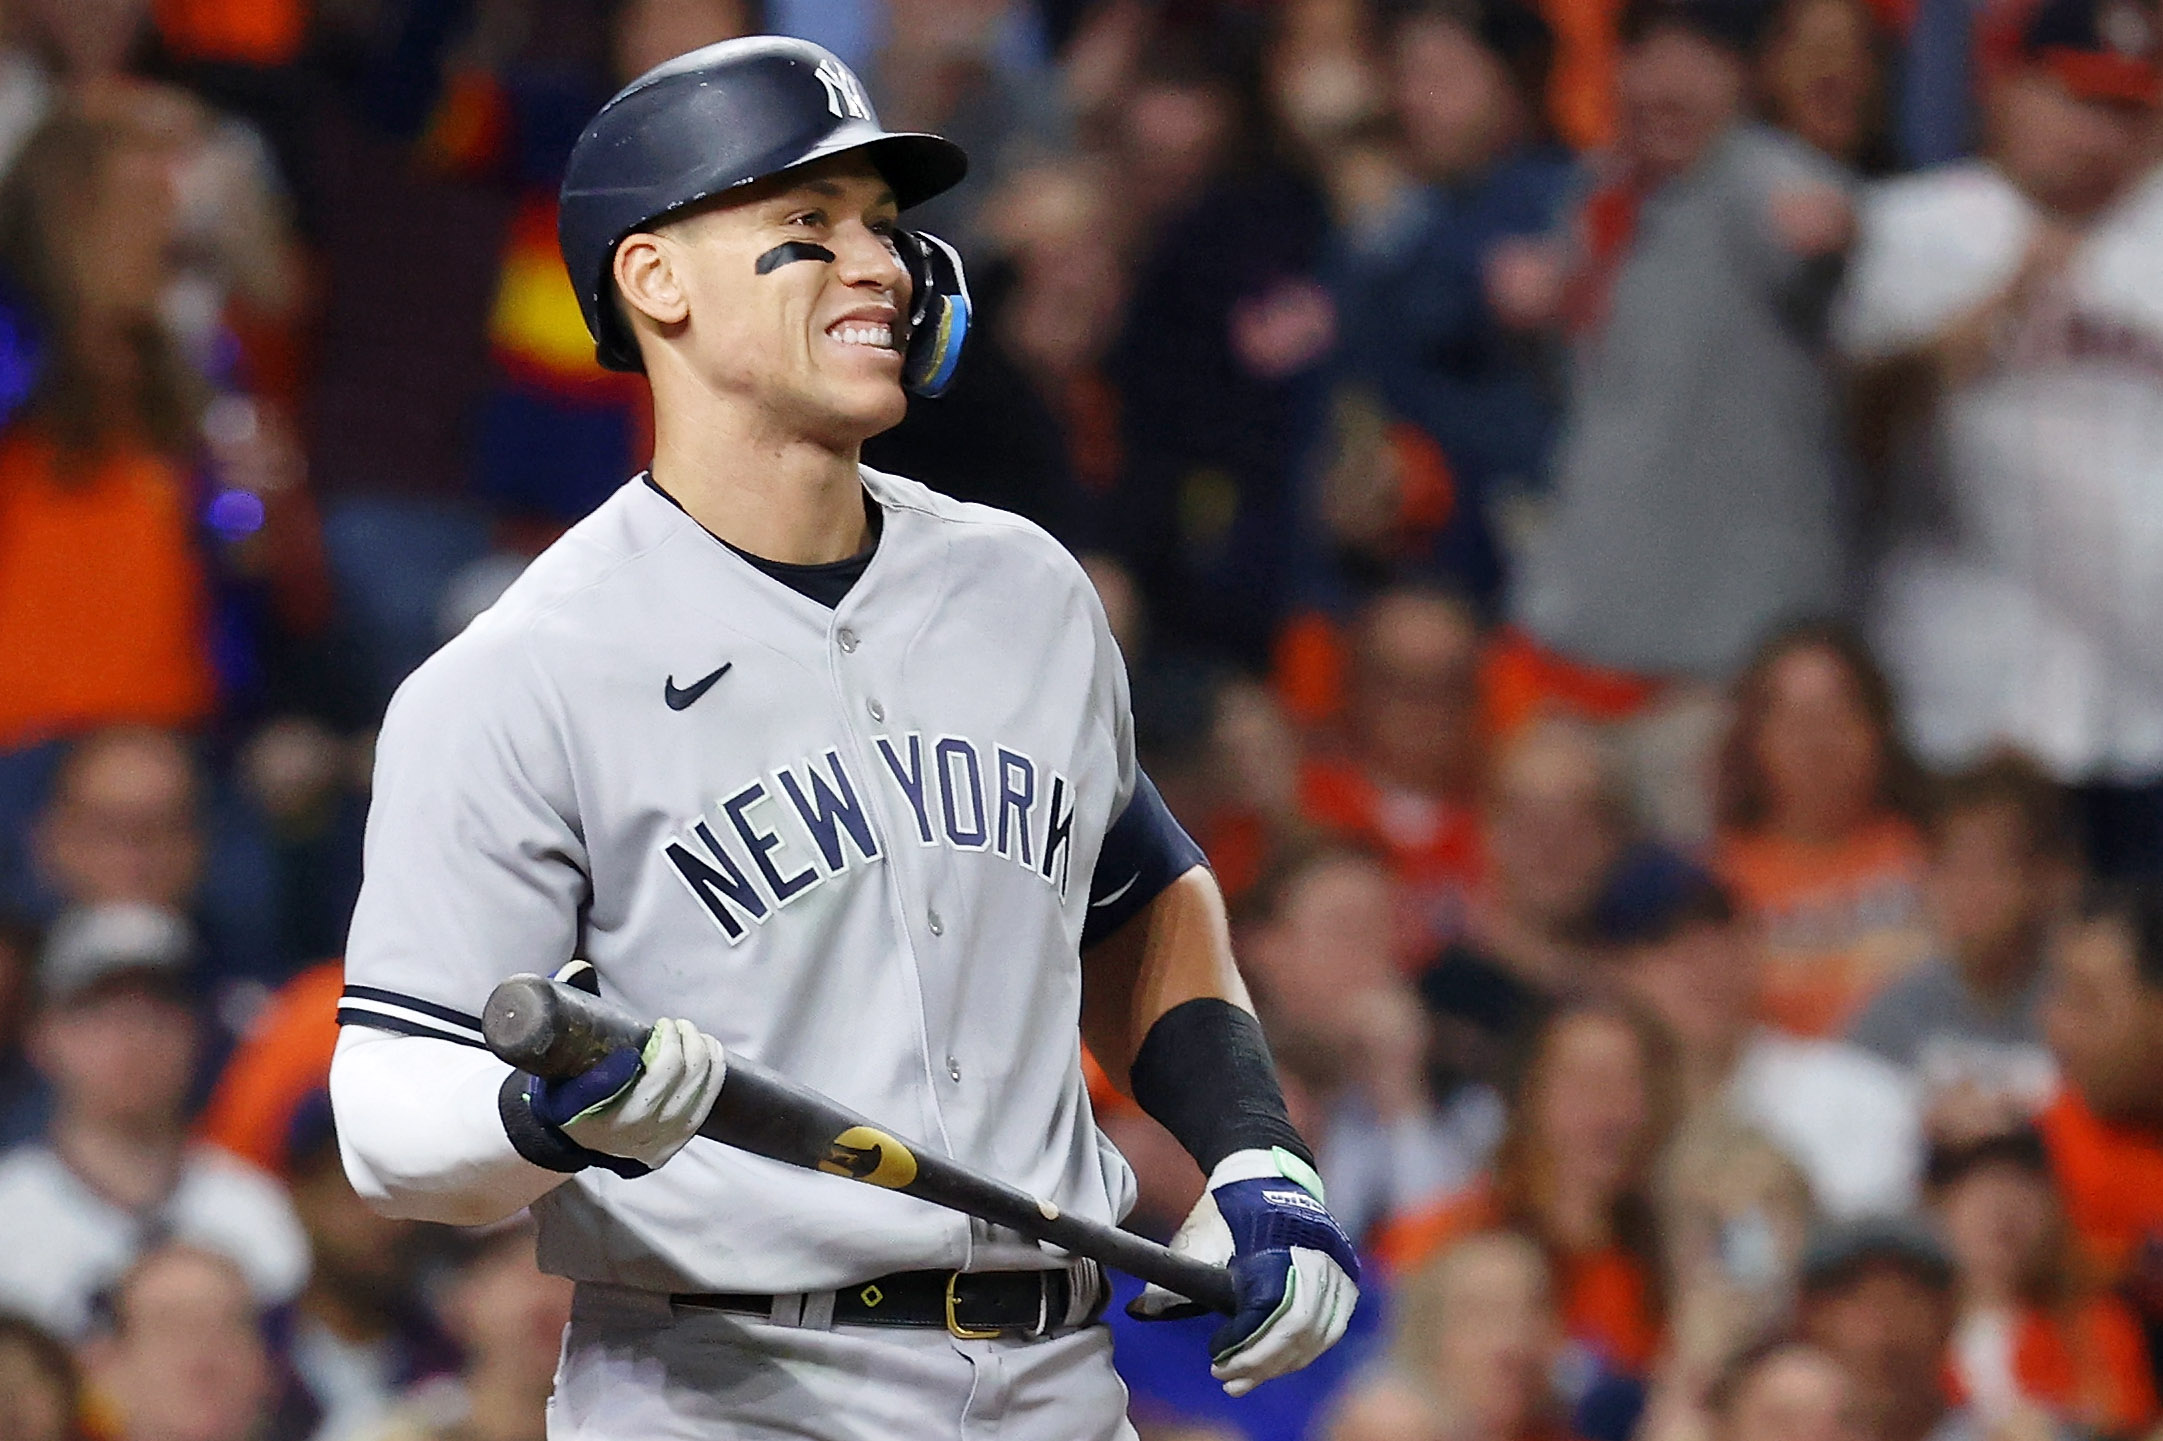 San Francisco Giants Will Do Whatever To Land Aaron Judge, Report